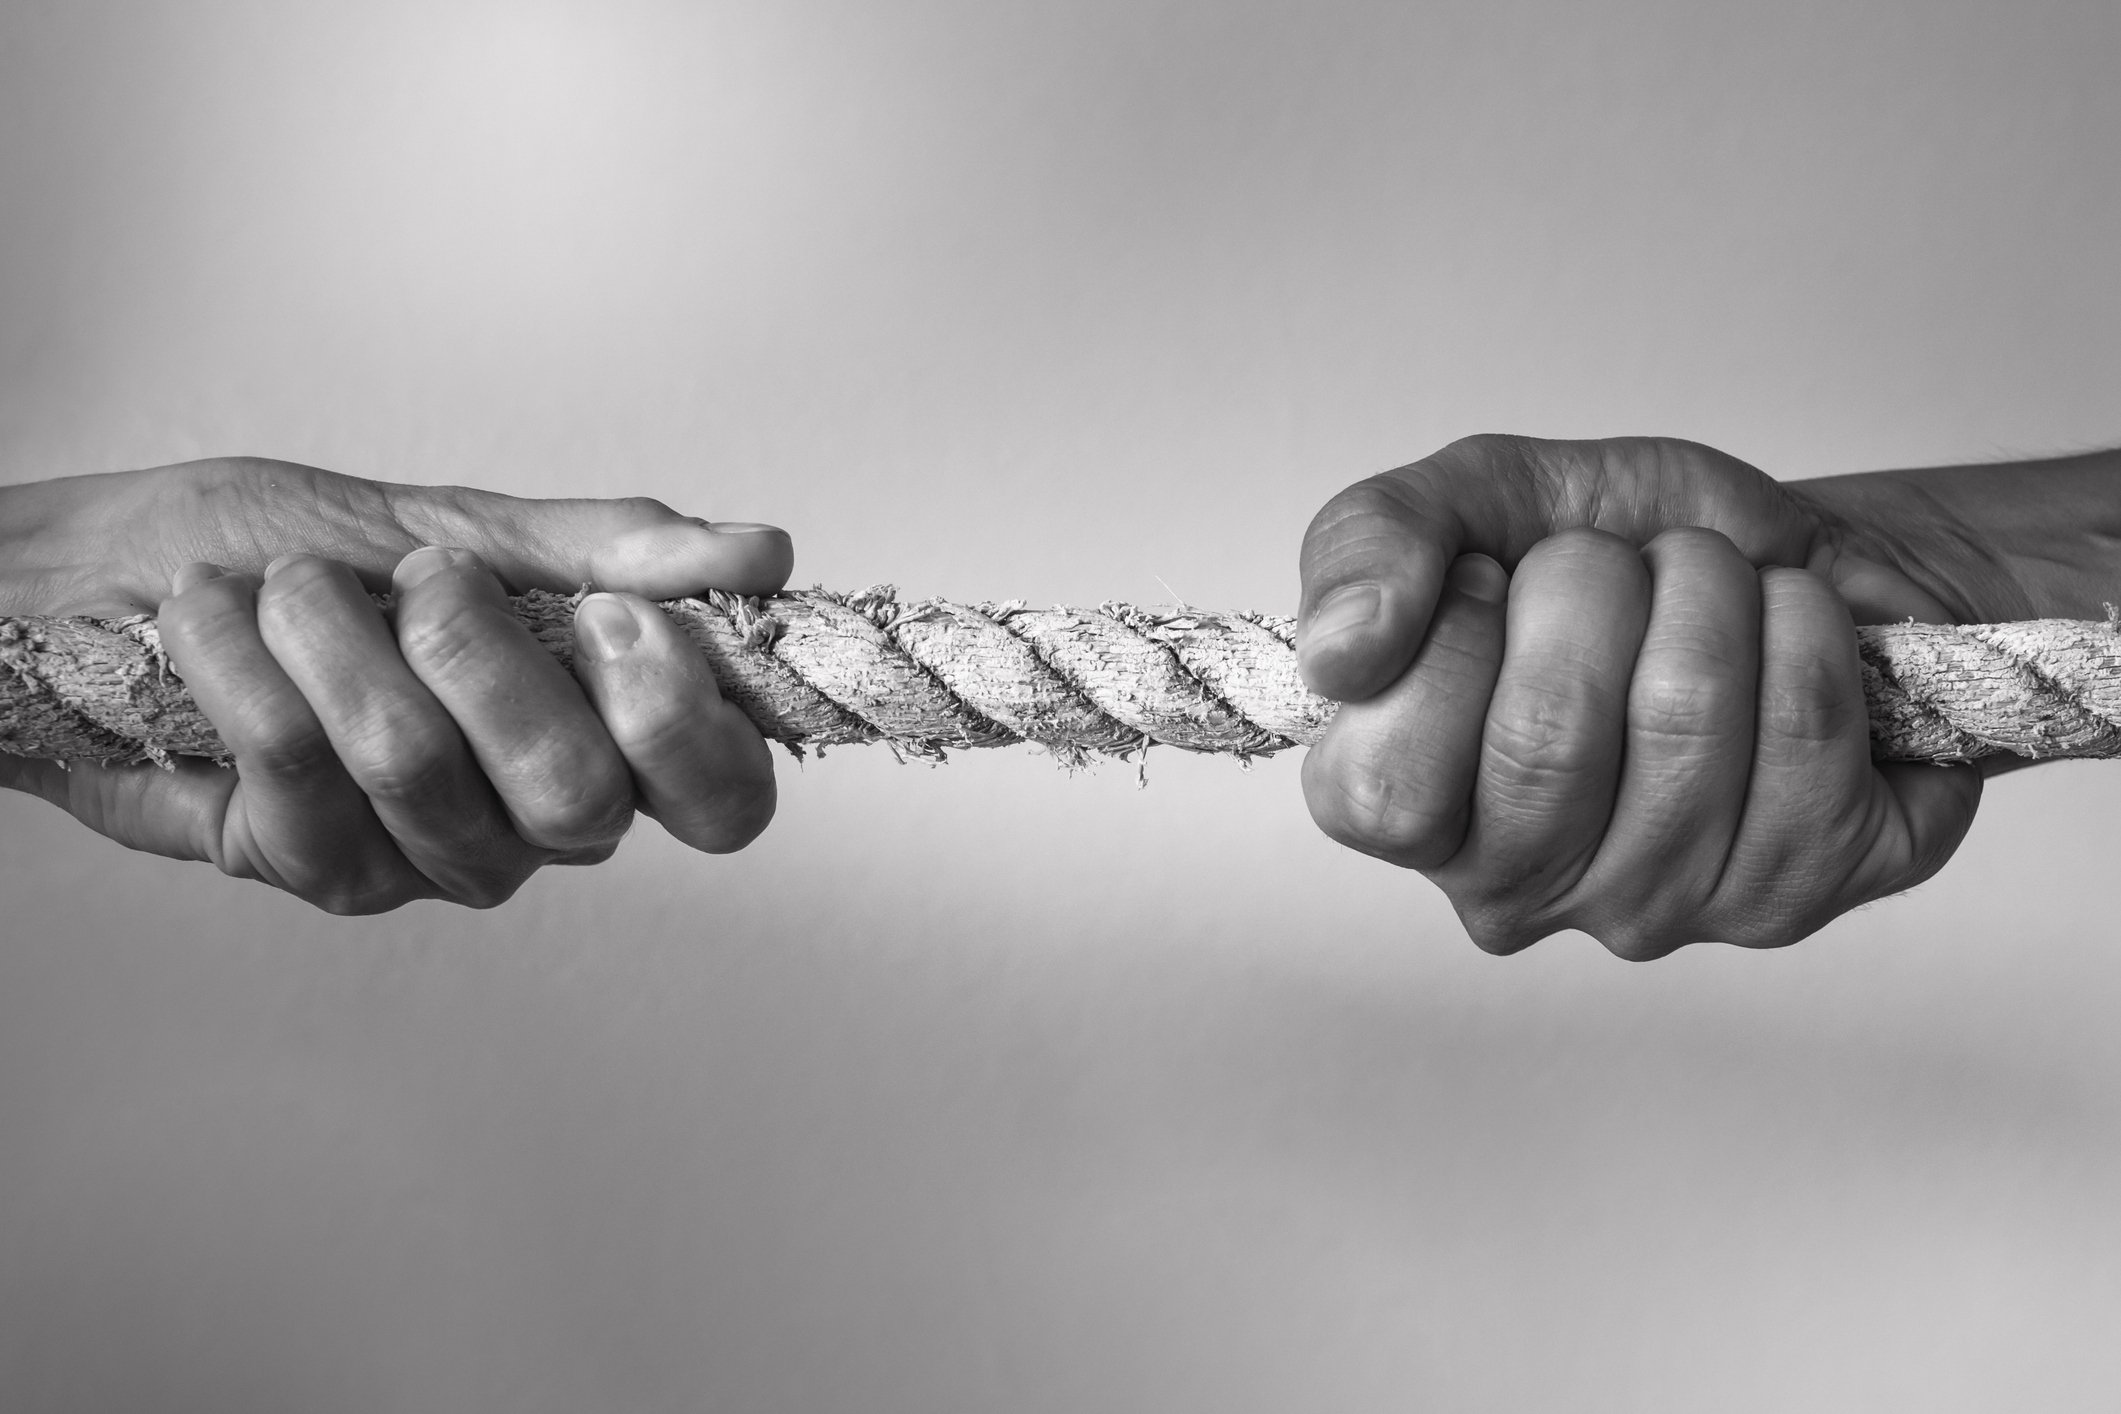 Two hands gripping onto a rope seemingly tugging in opposite directions